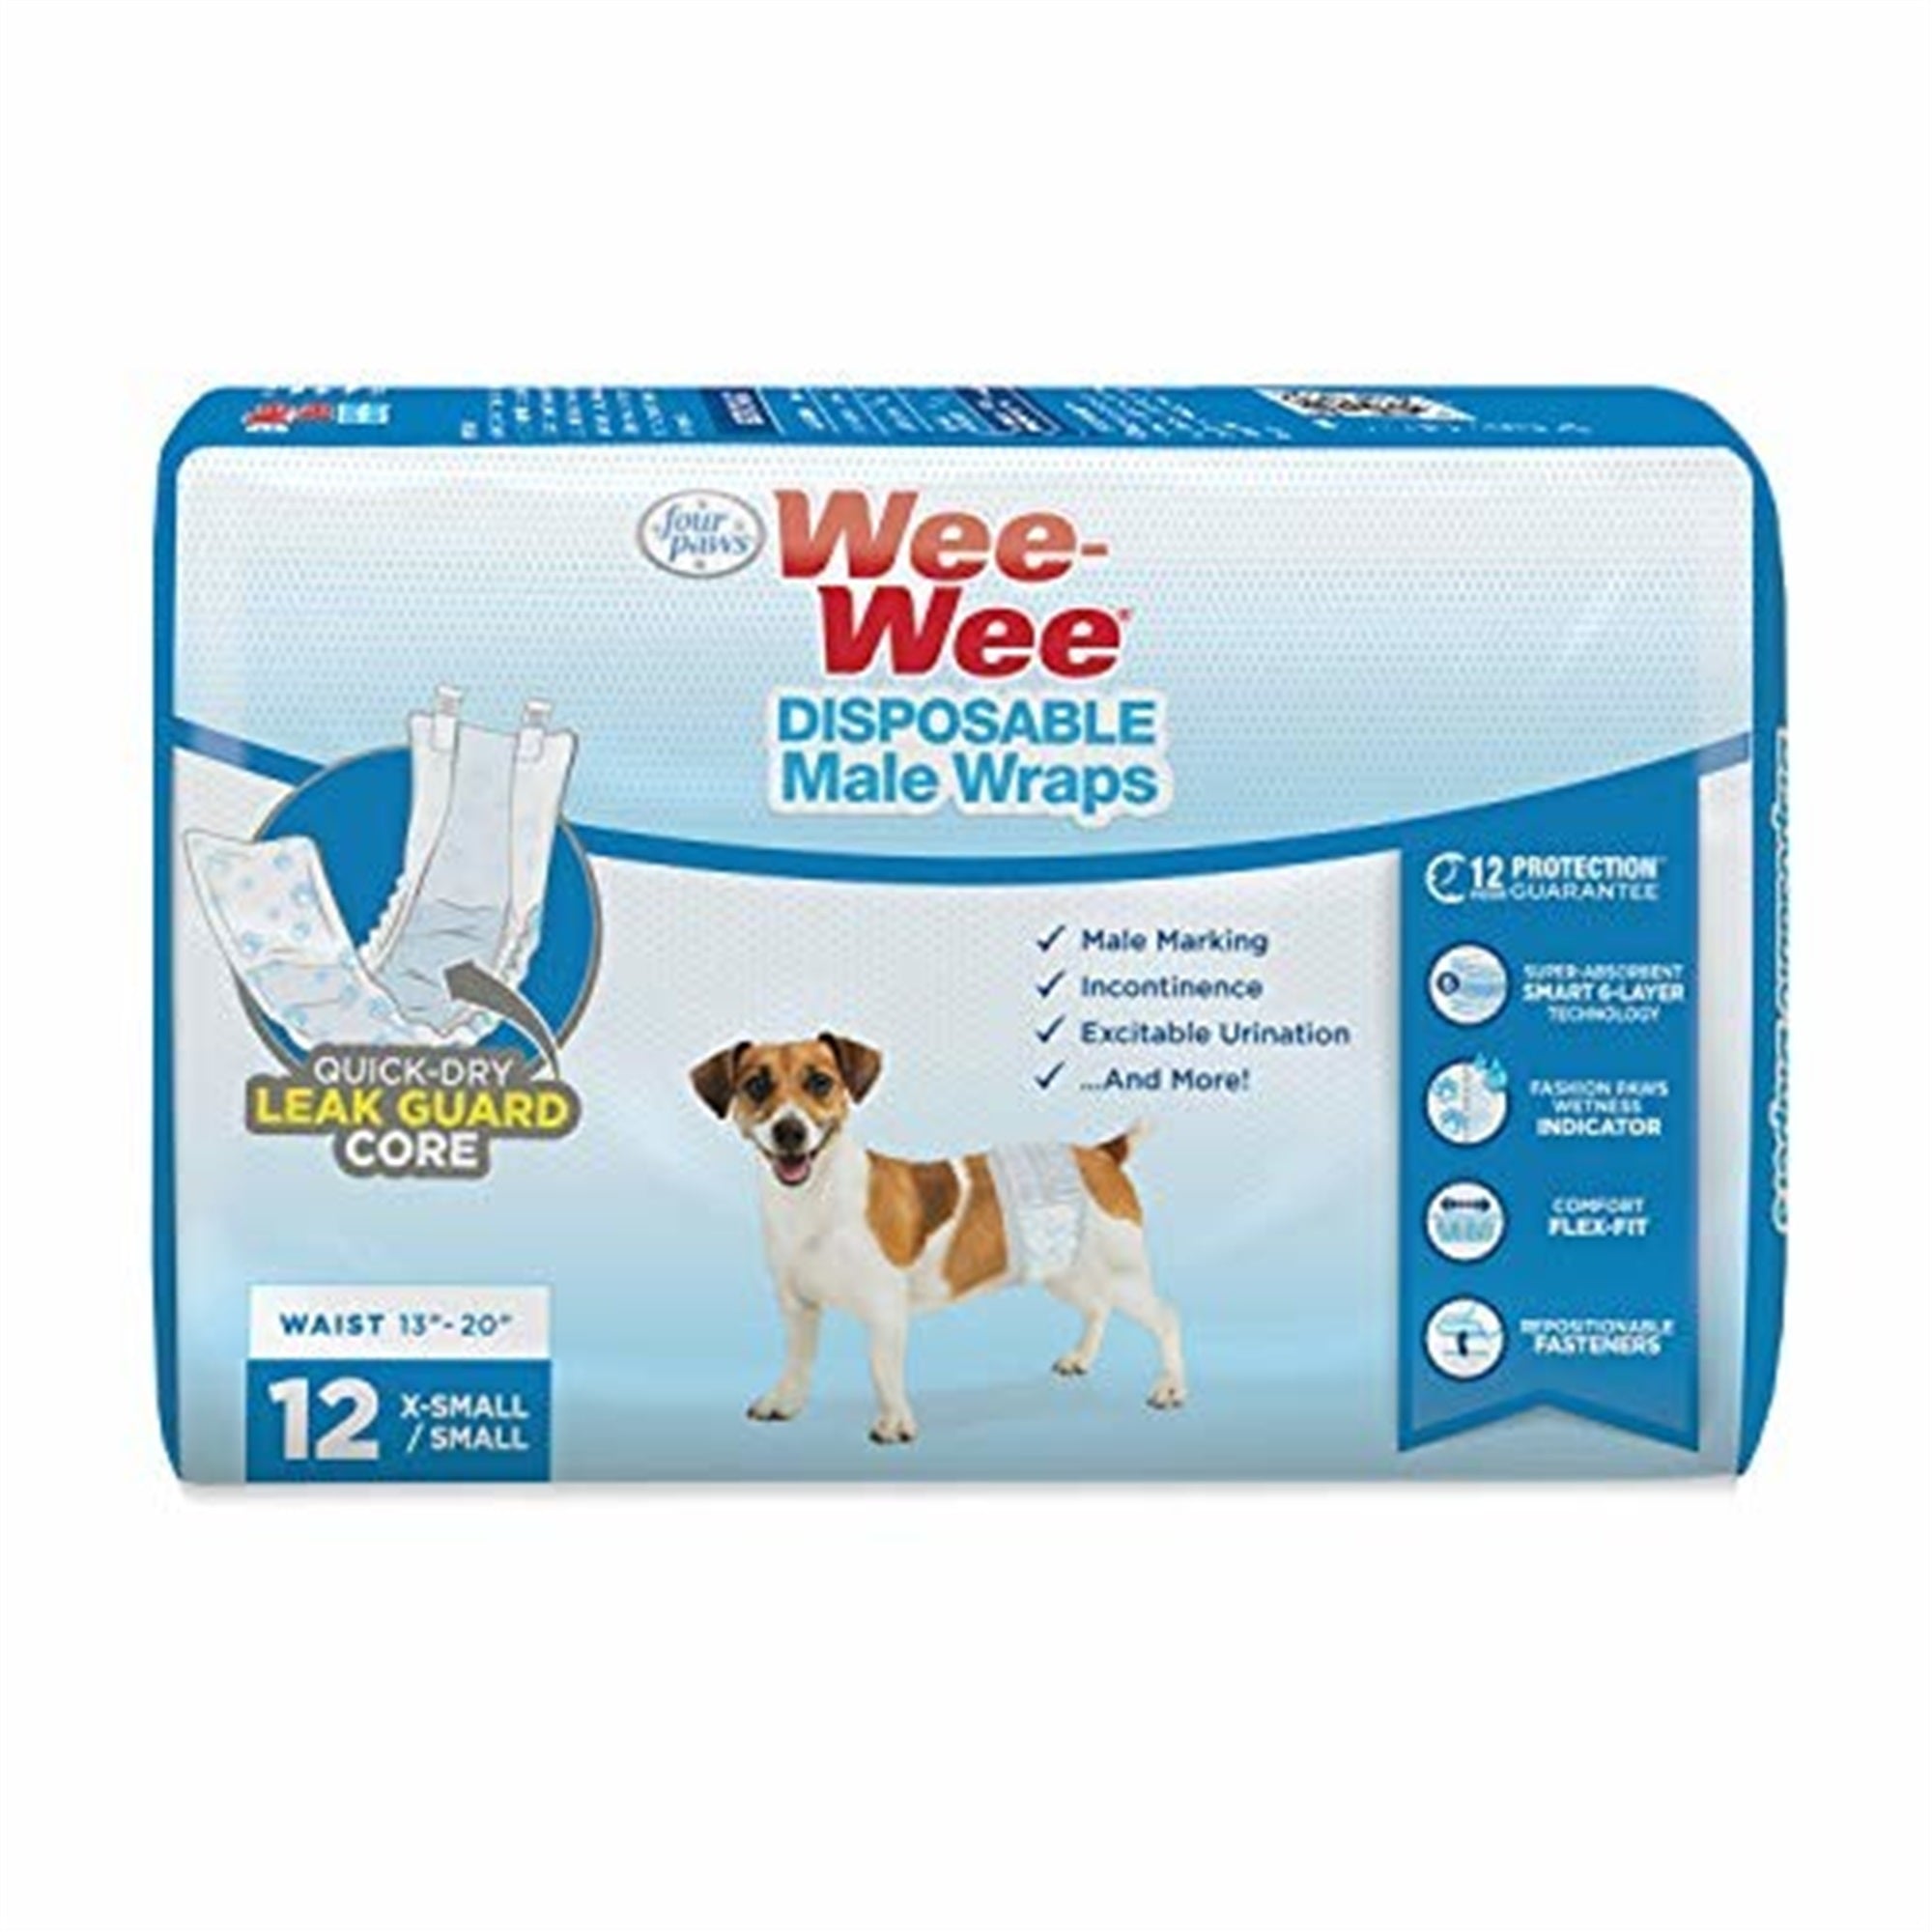 Four Paws Wee-Wee Disposable Male Dog Wraps, X-Small to Small (12 Per Pack)